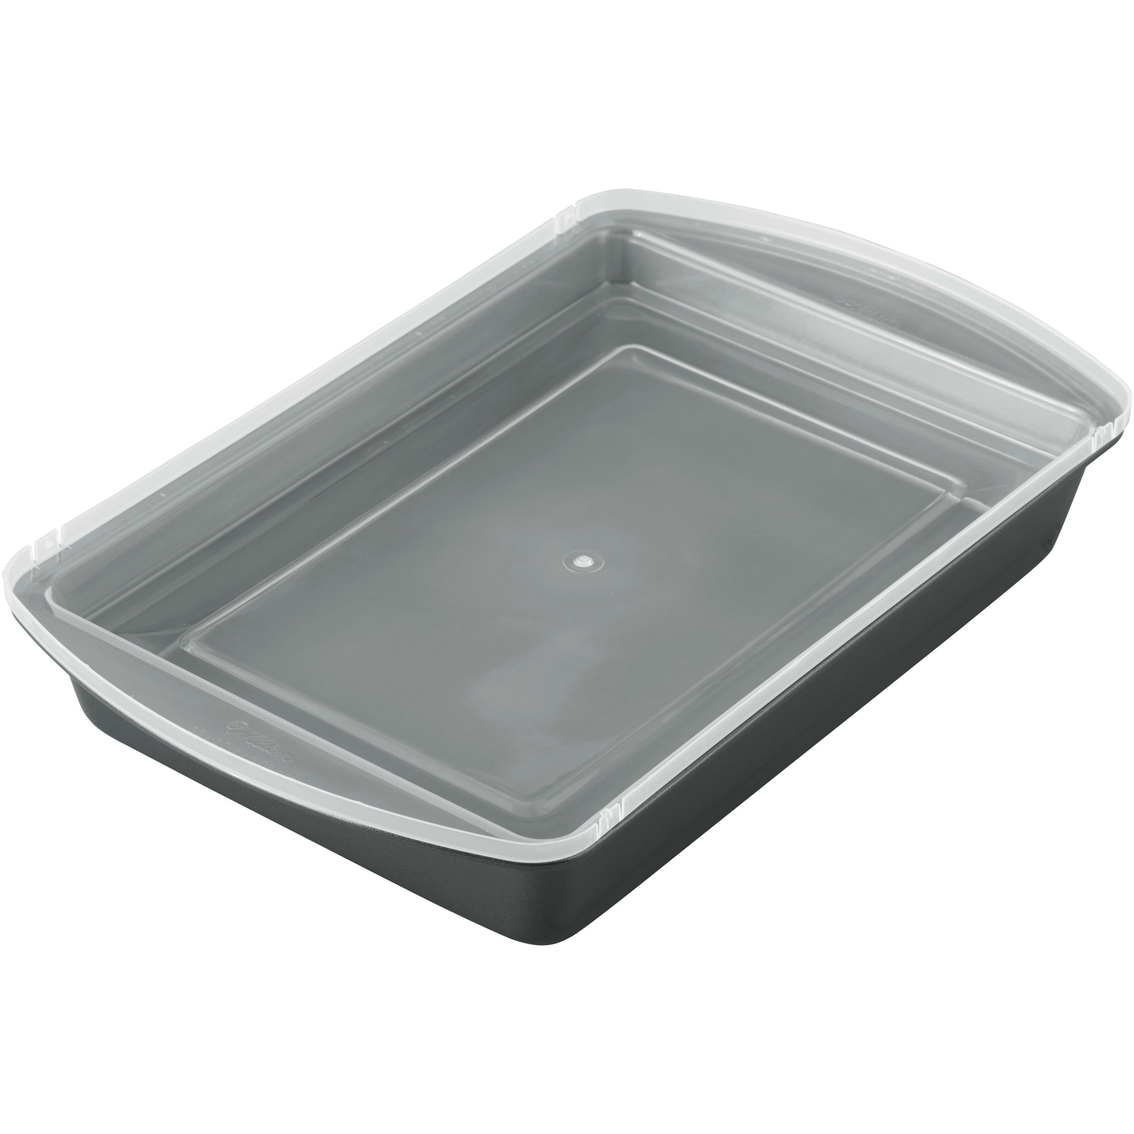 Wilton Perfect Results 13 x 9 Oblong Cake Pan with Cover - Image 3 of 4